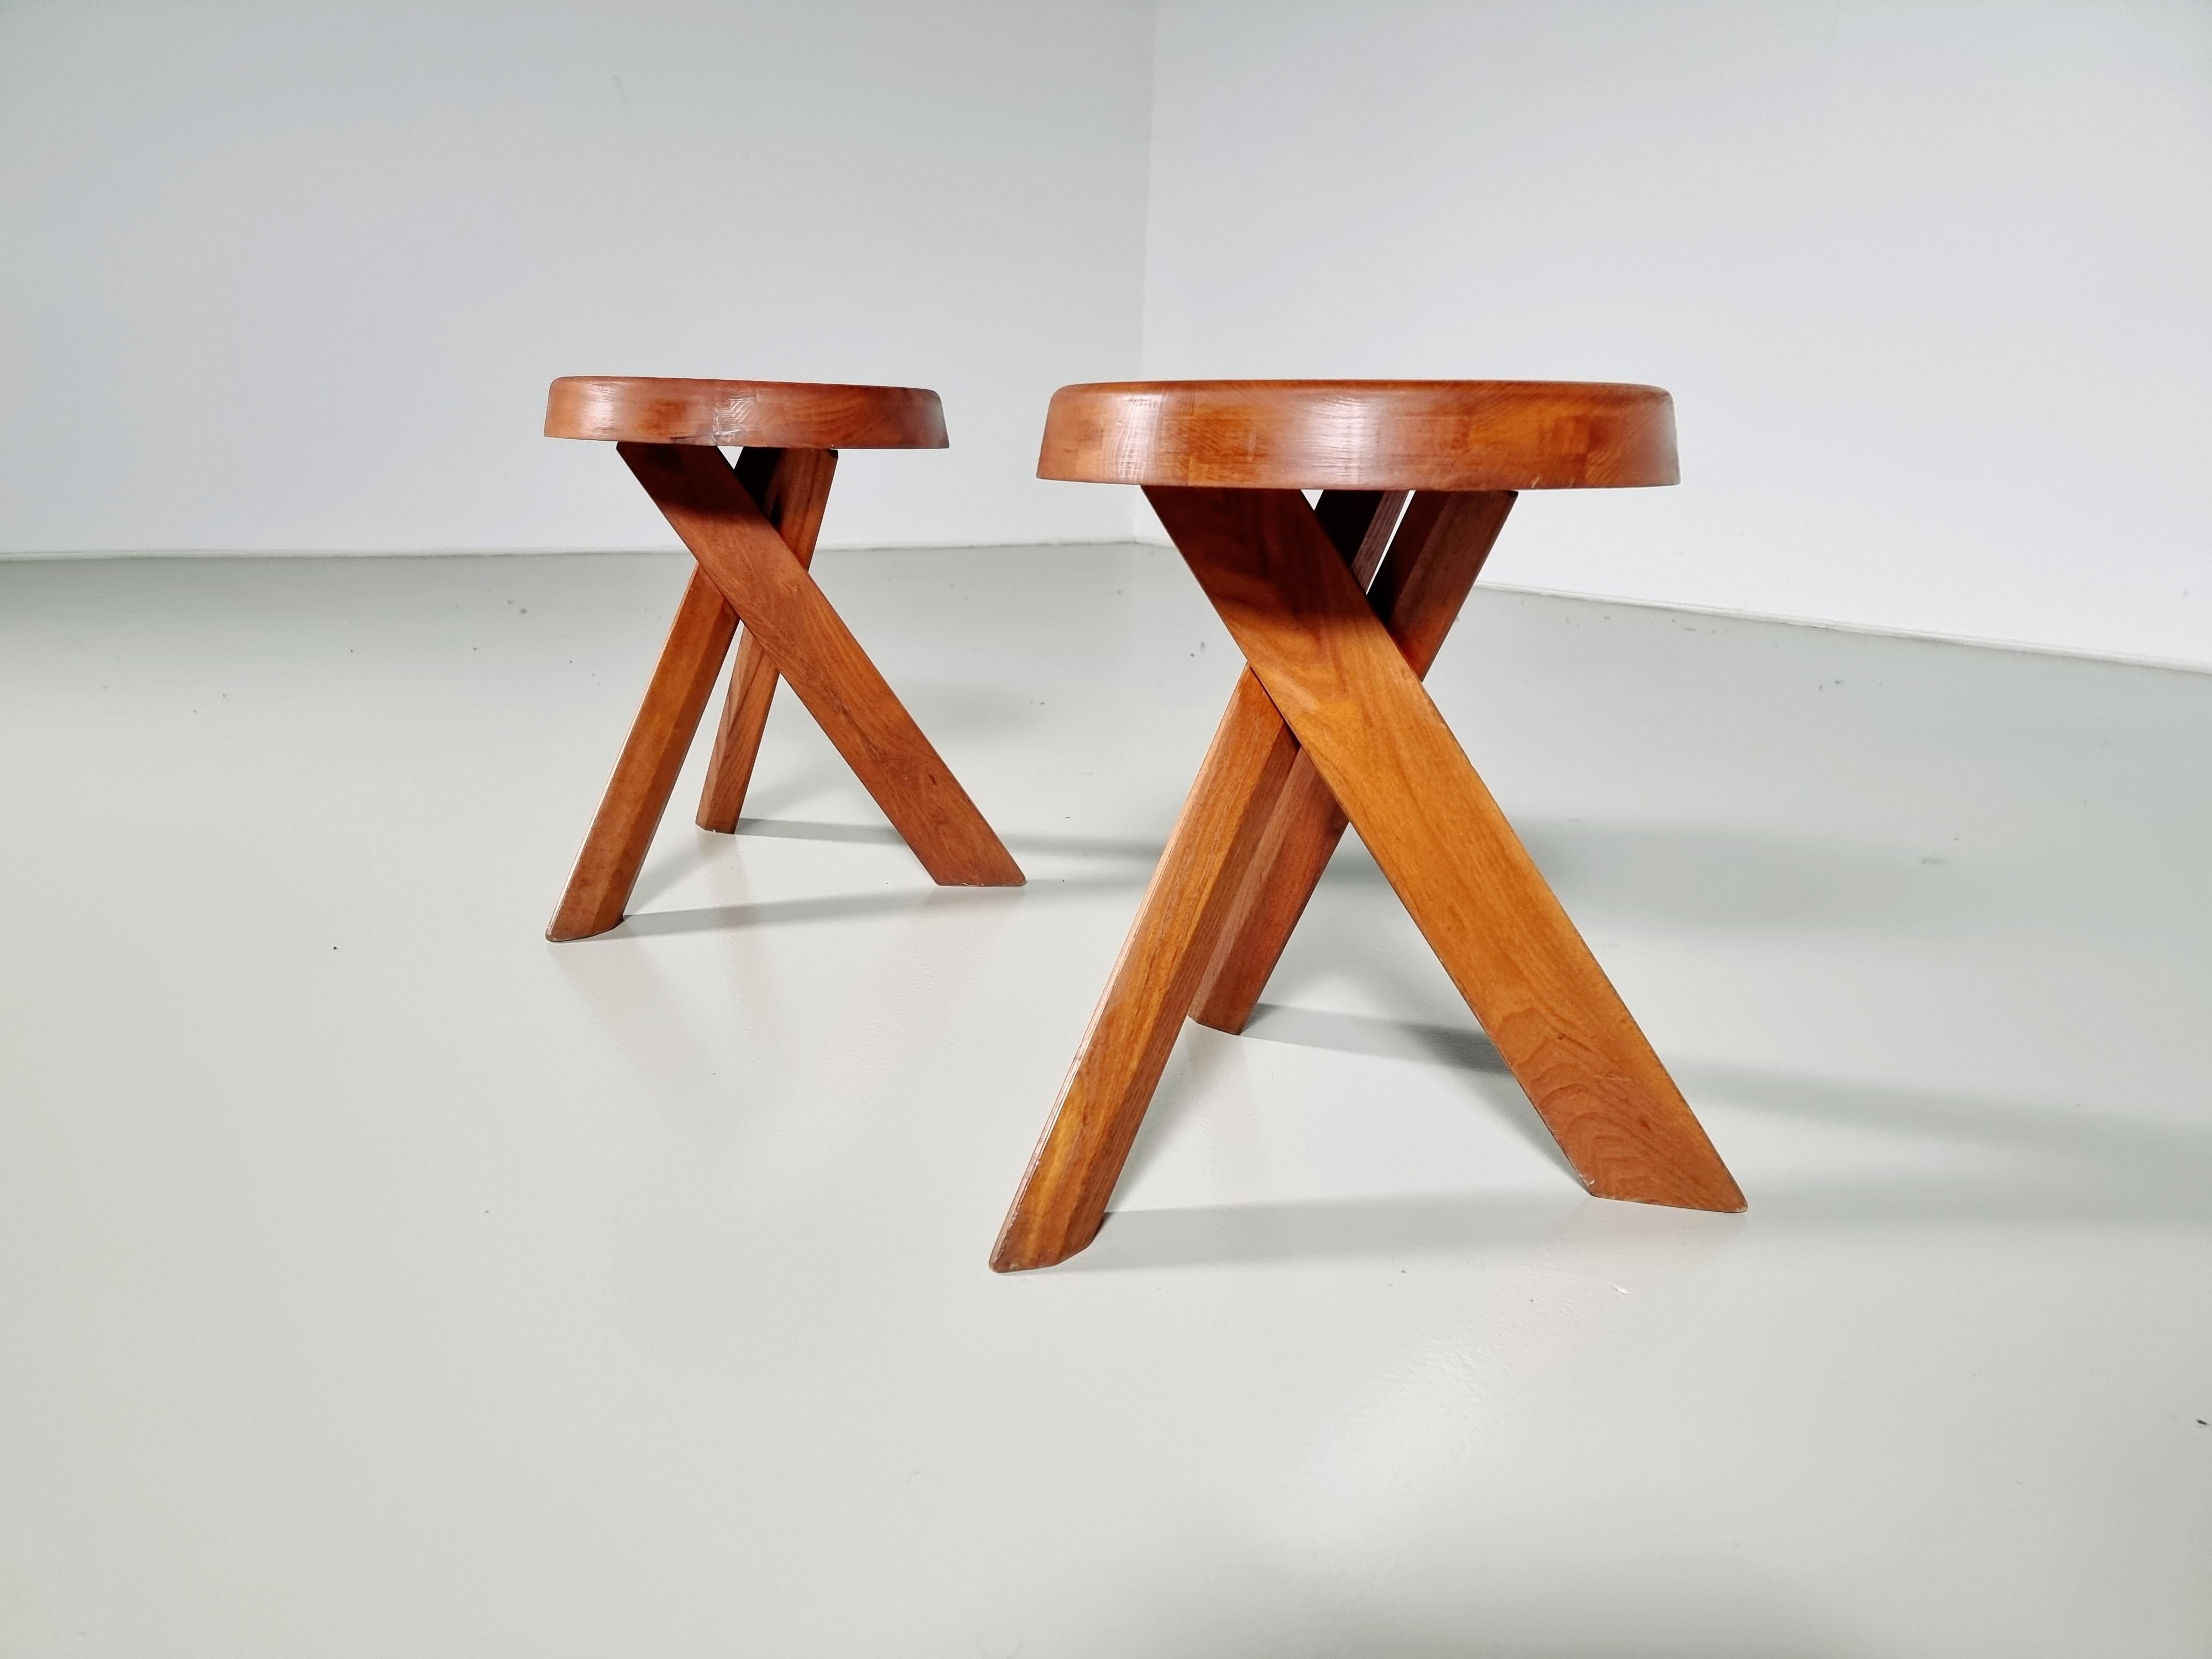 Pierre Chapo, stool model ´S31´, elm, France, designed the 1960s.

This asymmetrical stool with twisted legs is an icon of Pierre Chapo's designs. The piece is made of solid elm. The used material, the cross-legged base, and the wood joints are